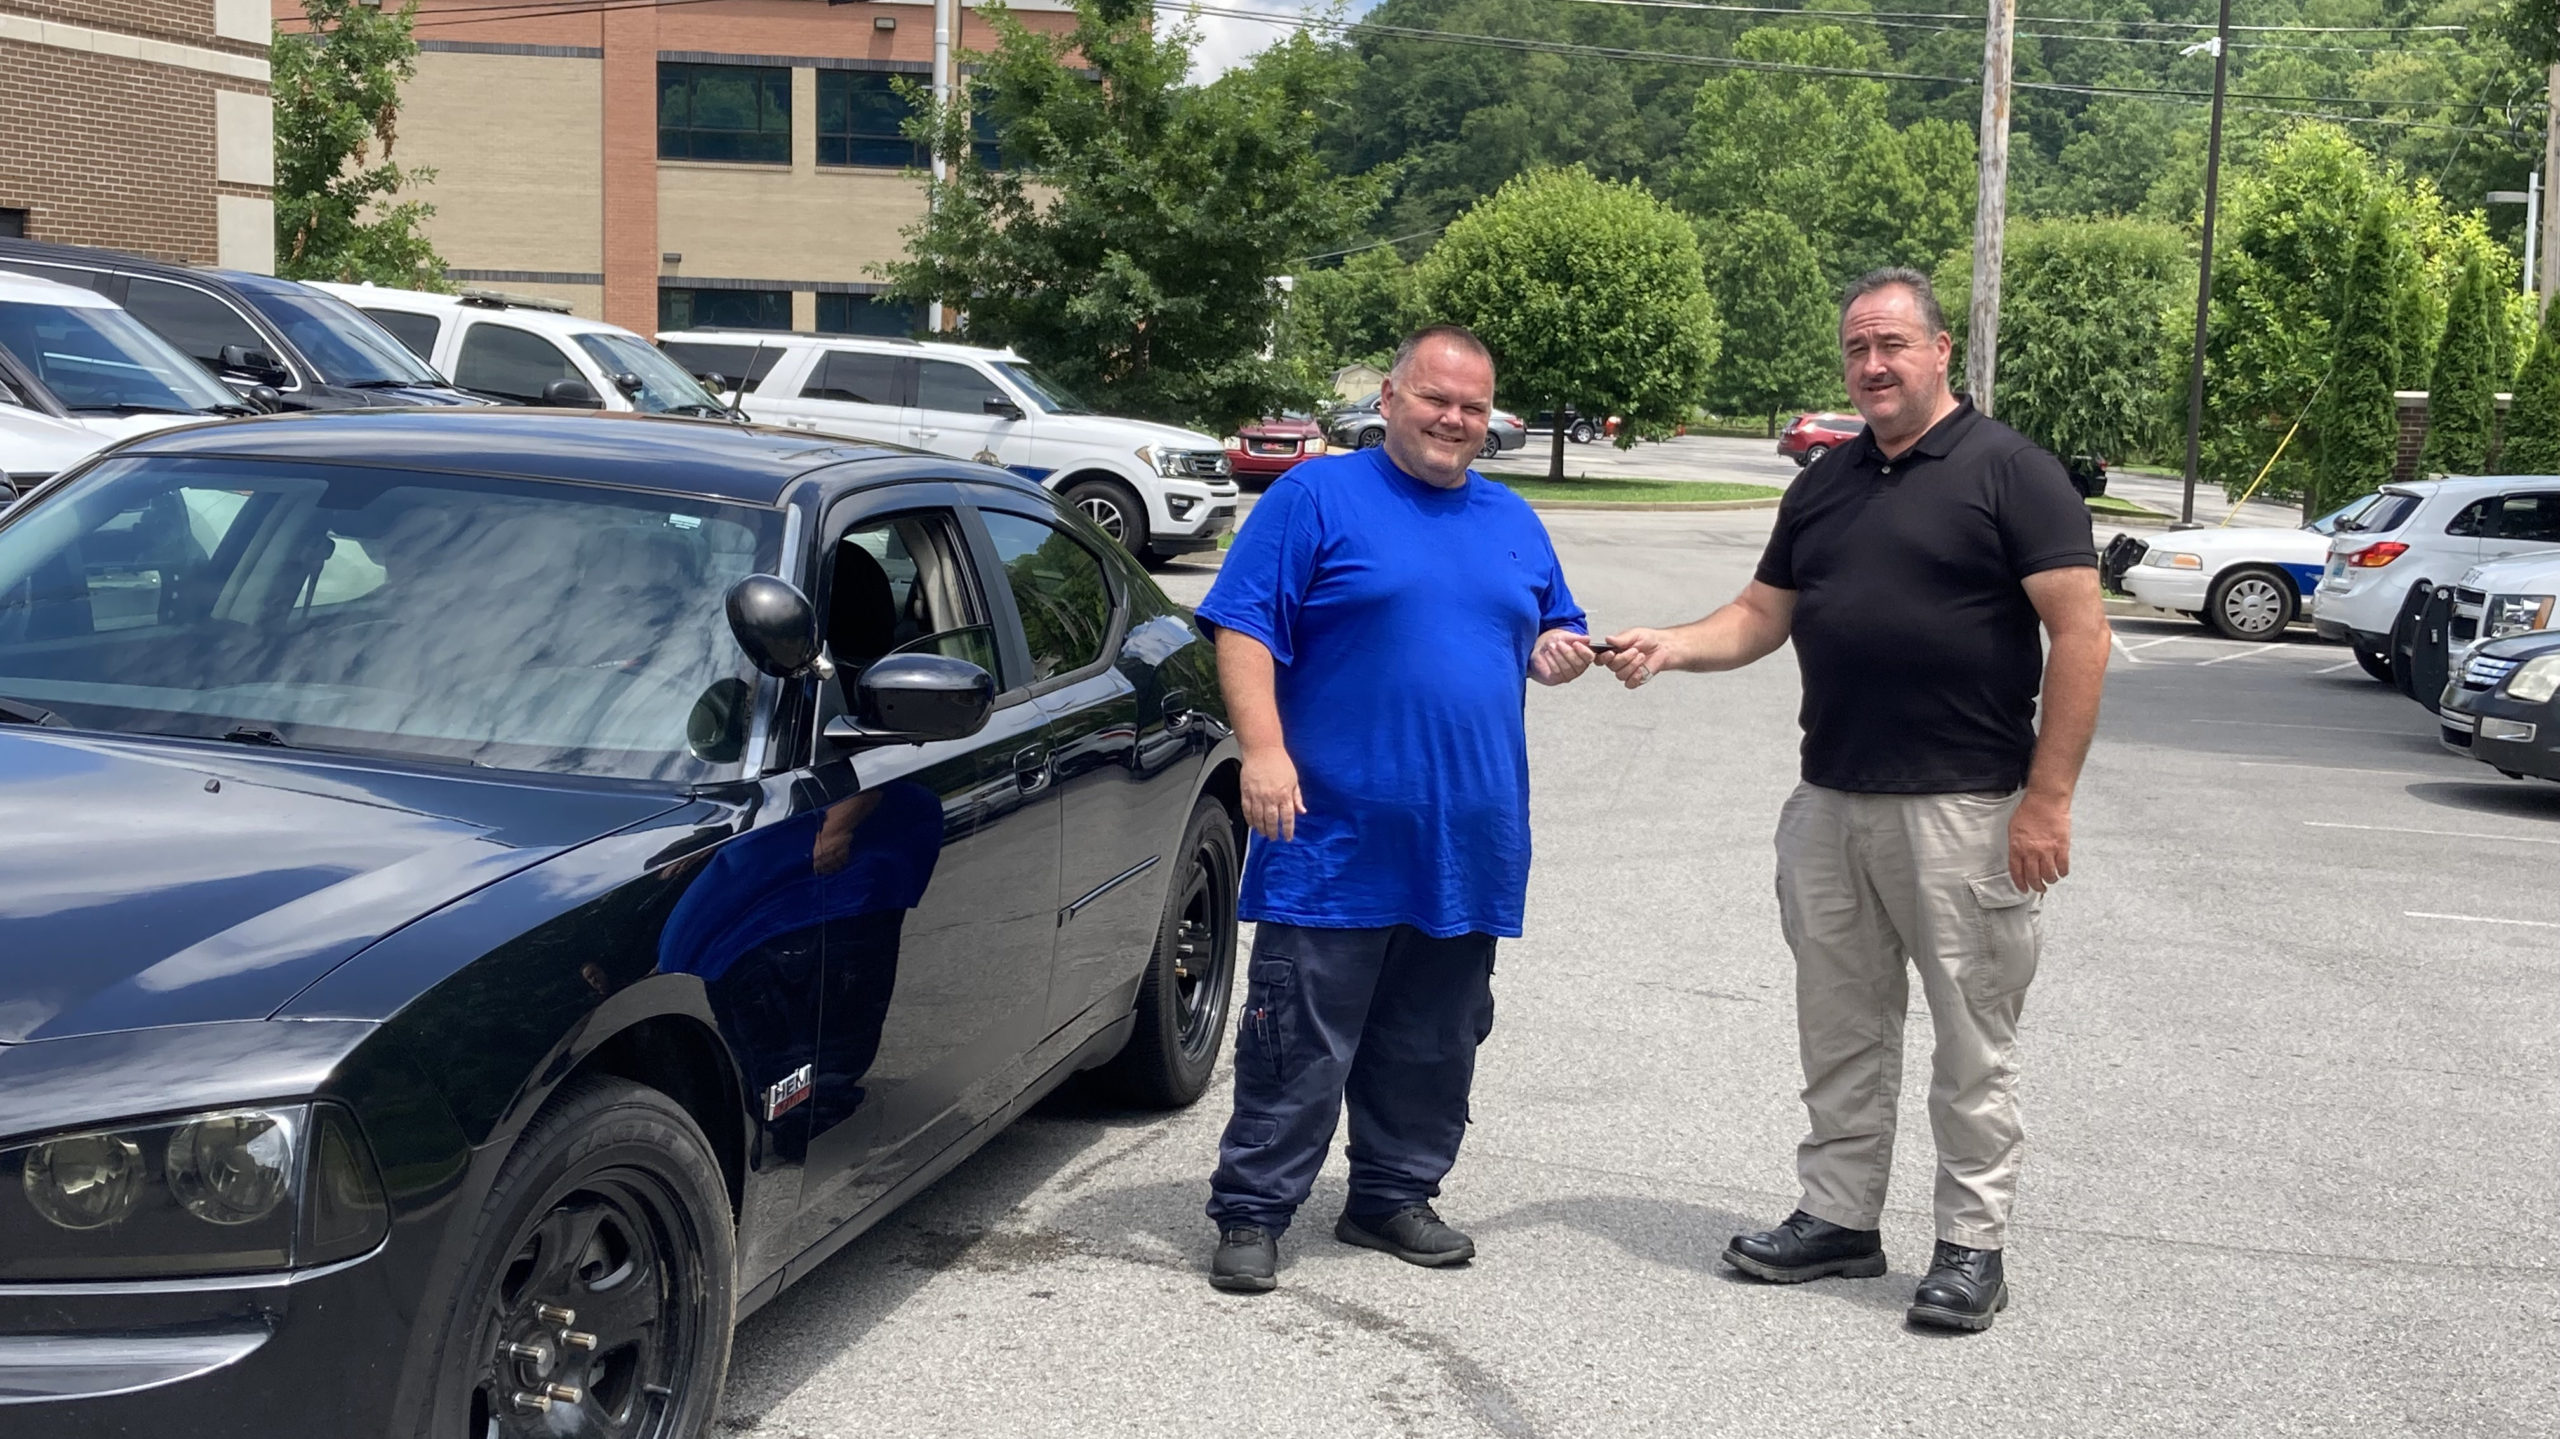 Sheriff donates vehicle to Warfield fire department